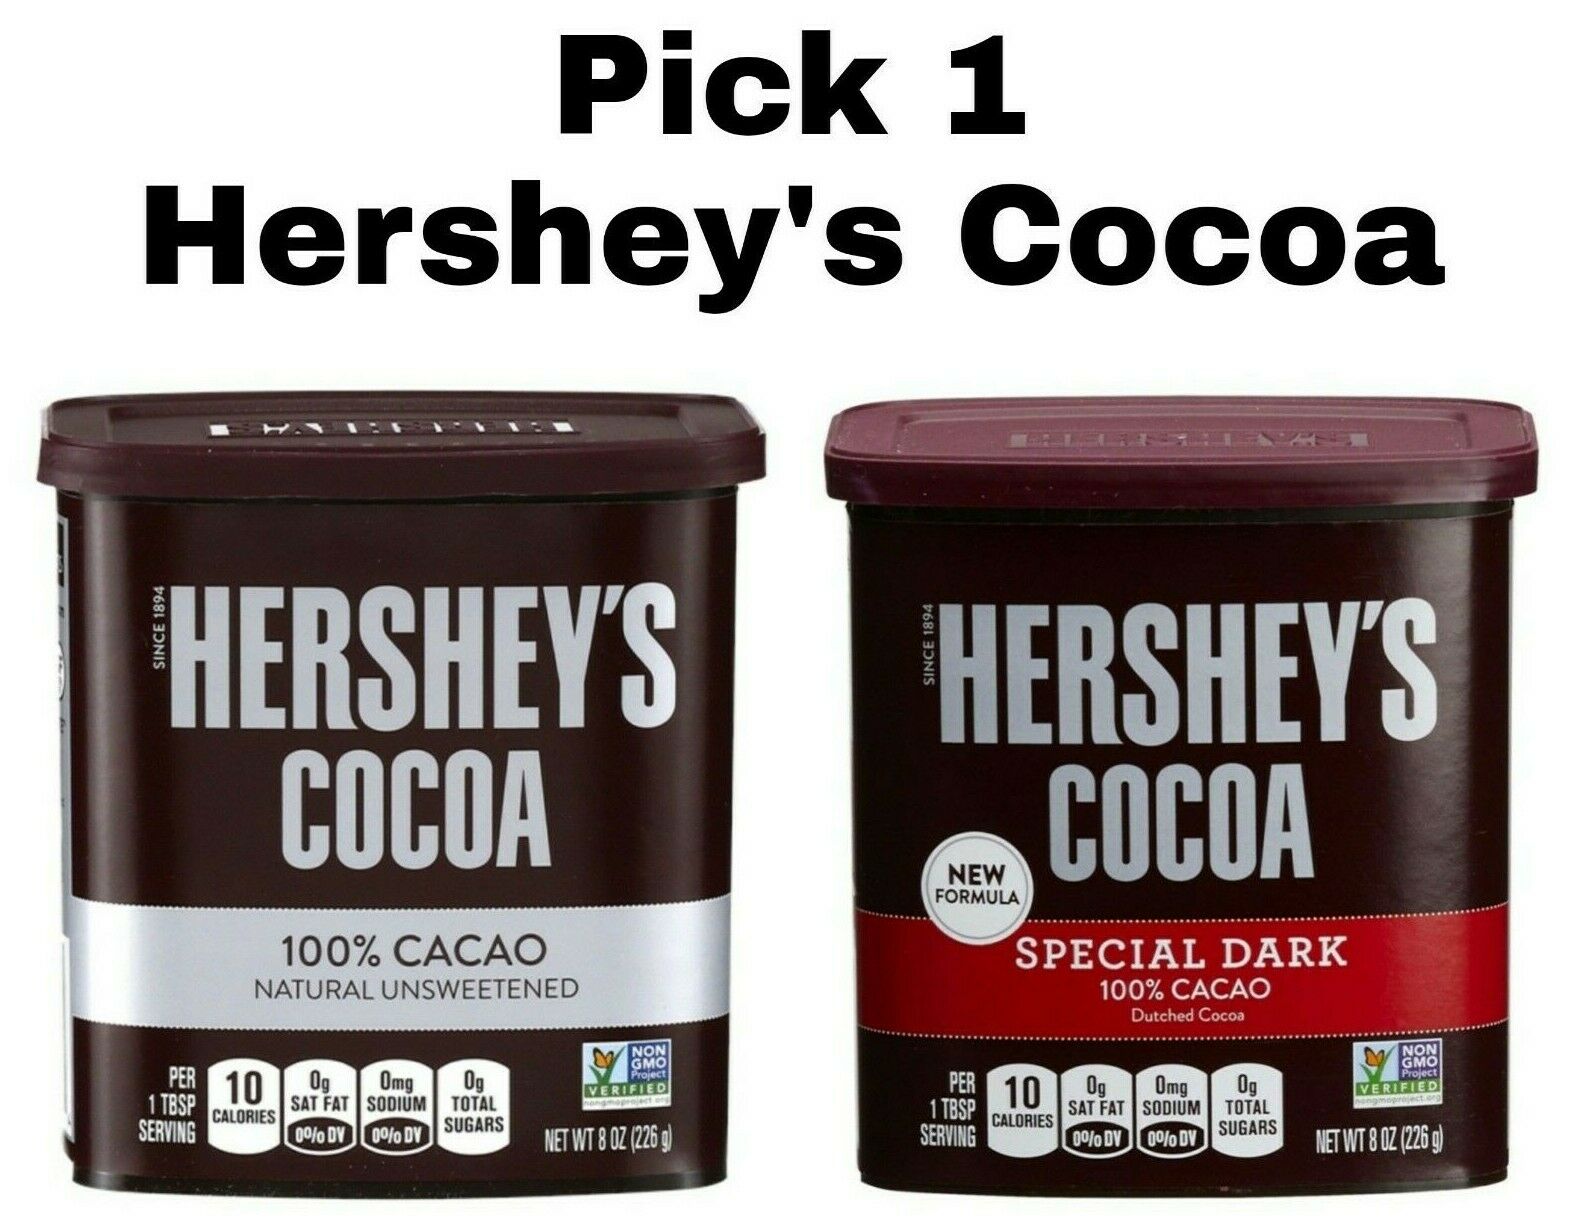 Pick 1 Hershey's Cocoa Powder 100% Natural Unsweetened / Special Dark Cacao 8 Oz